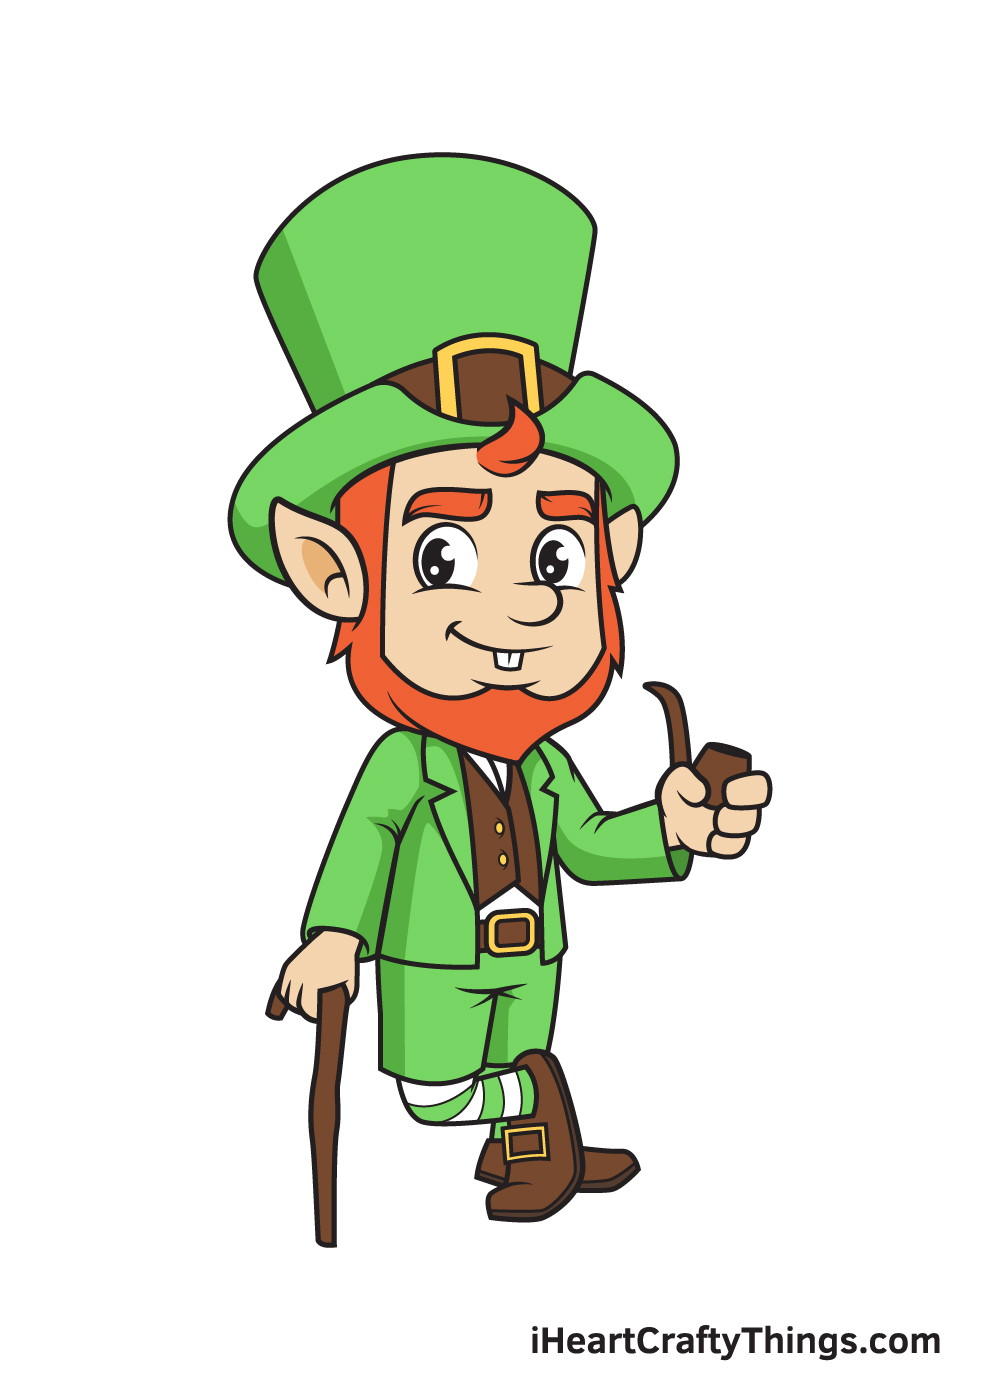 Leprechaun sketched with pencil and charcoal,highlighting and background do...